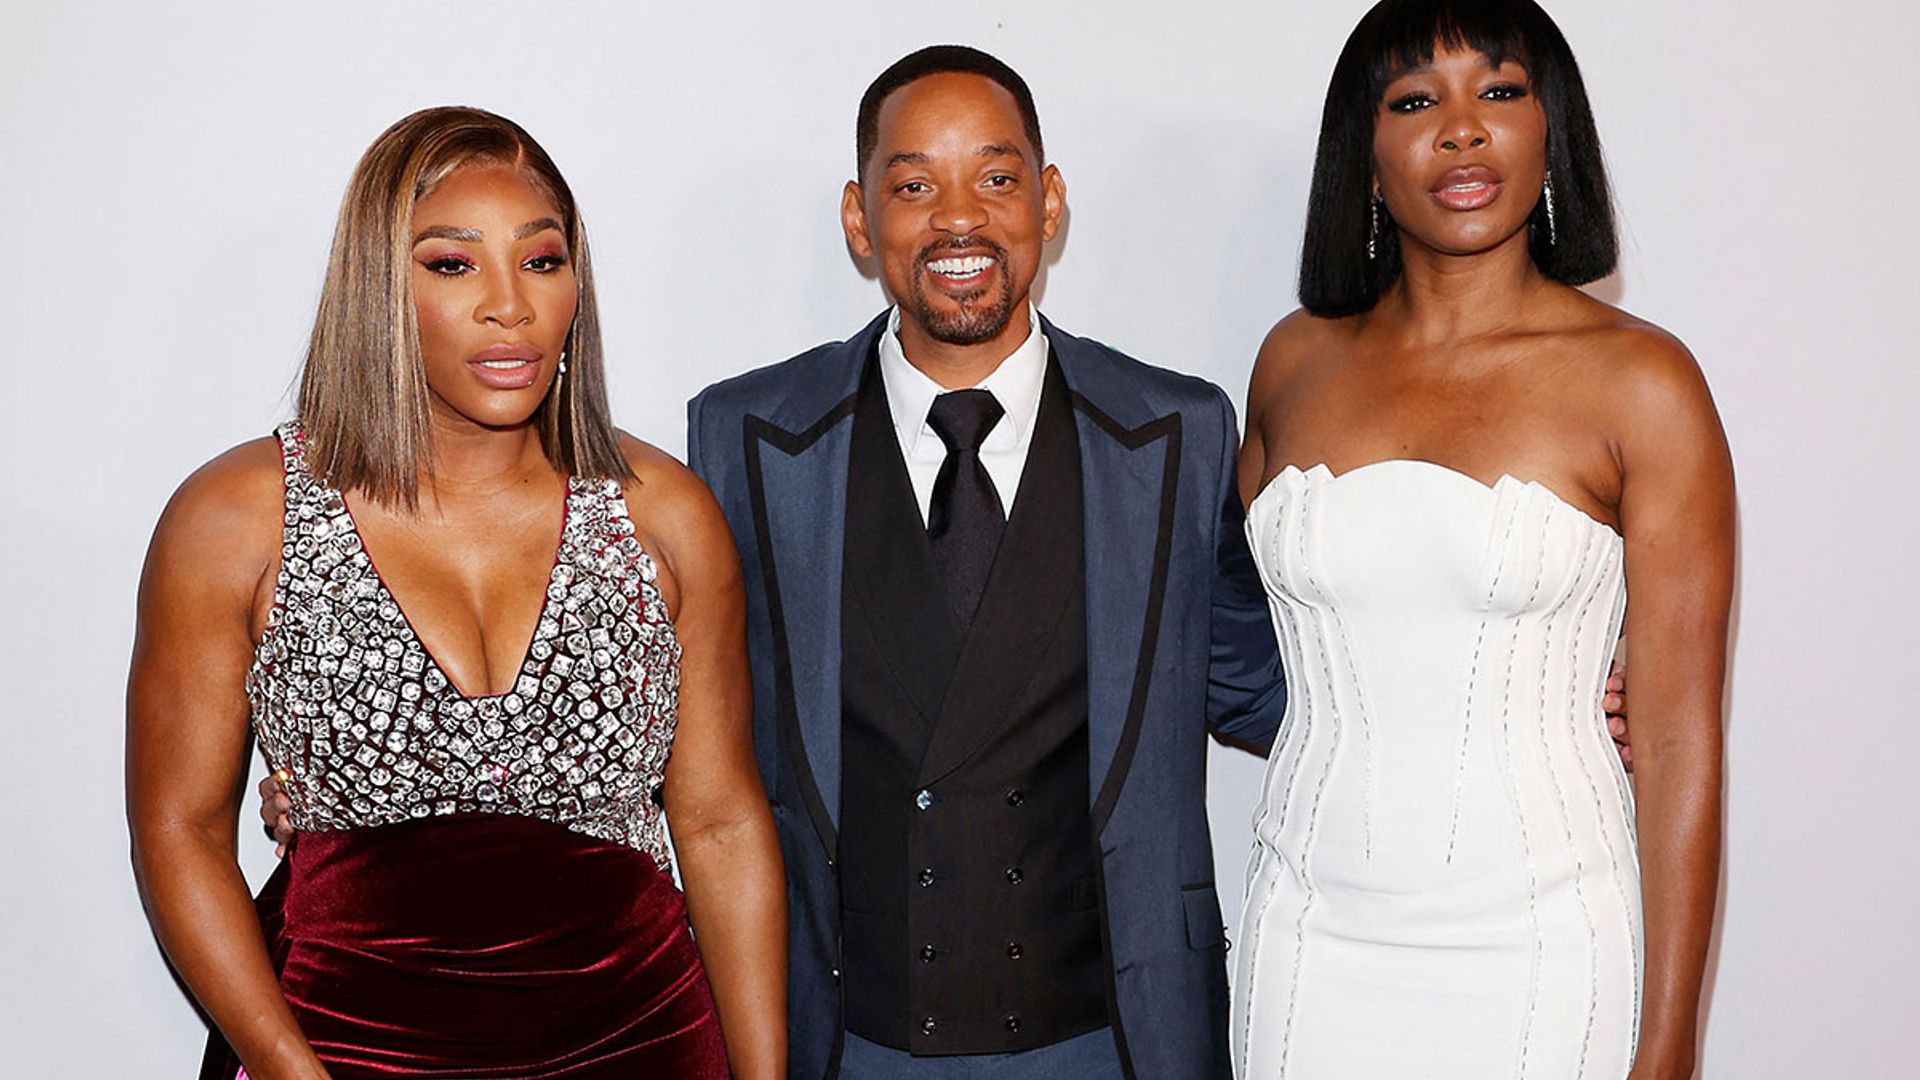 Serena Williams speaks out after Will Smith's public apology to her family